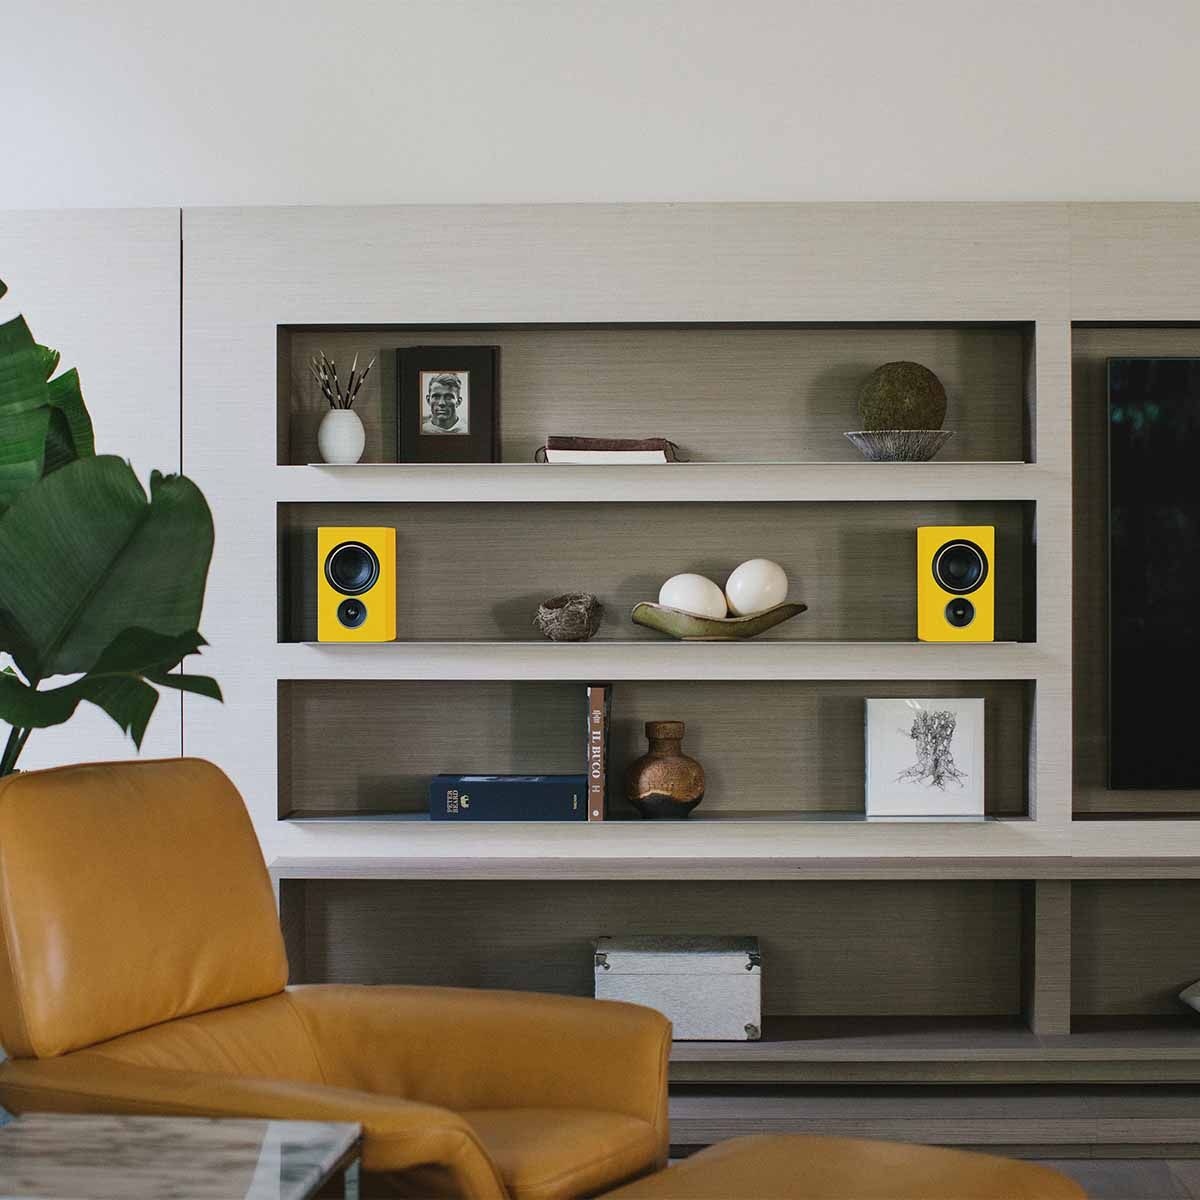 PSB Alpha iQ Streaming Powered Speakers - yellow pair - lifestyle image